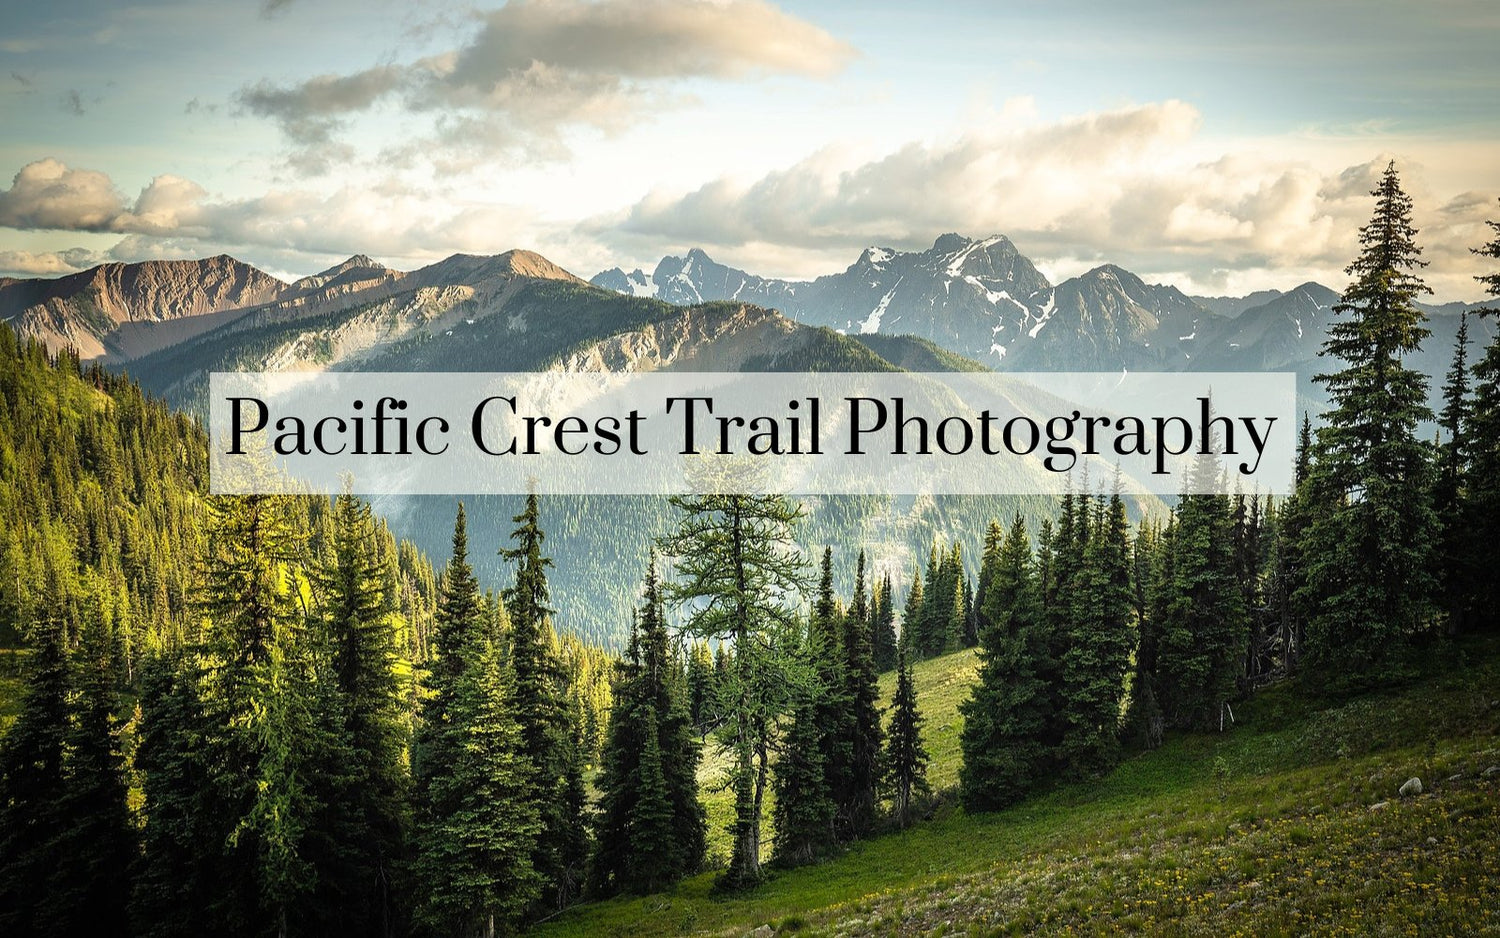 PACIFIC CREST TRAIL PHOTOGRAPHY